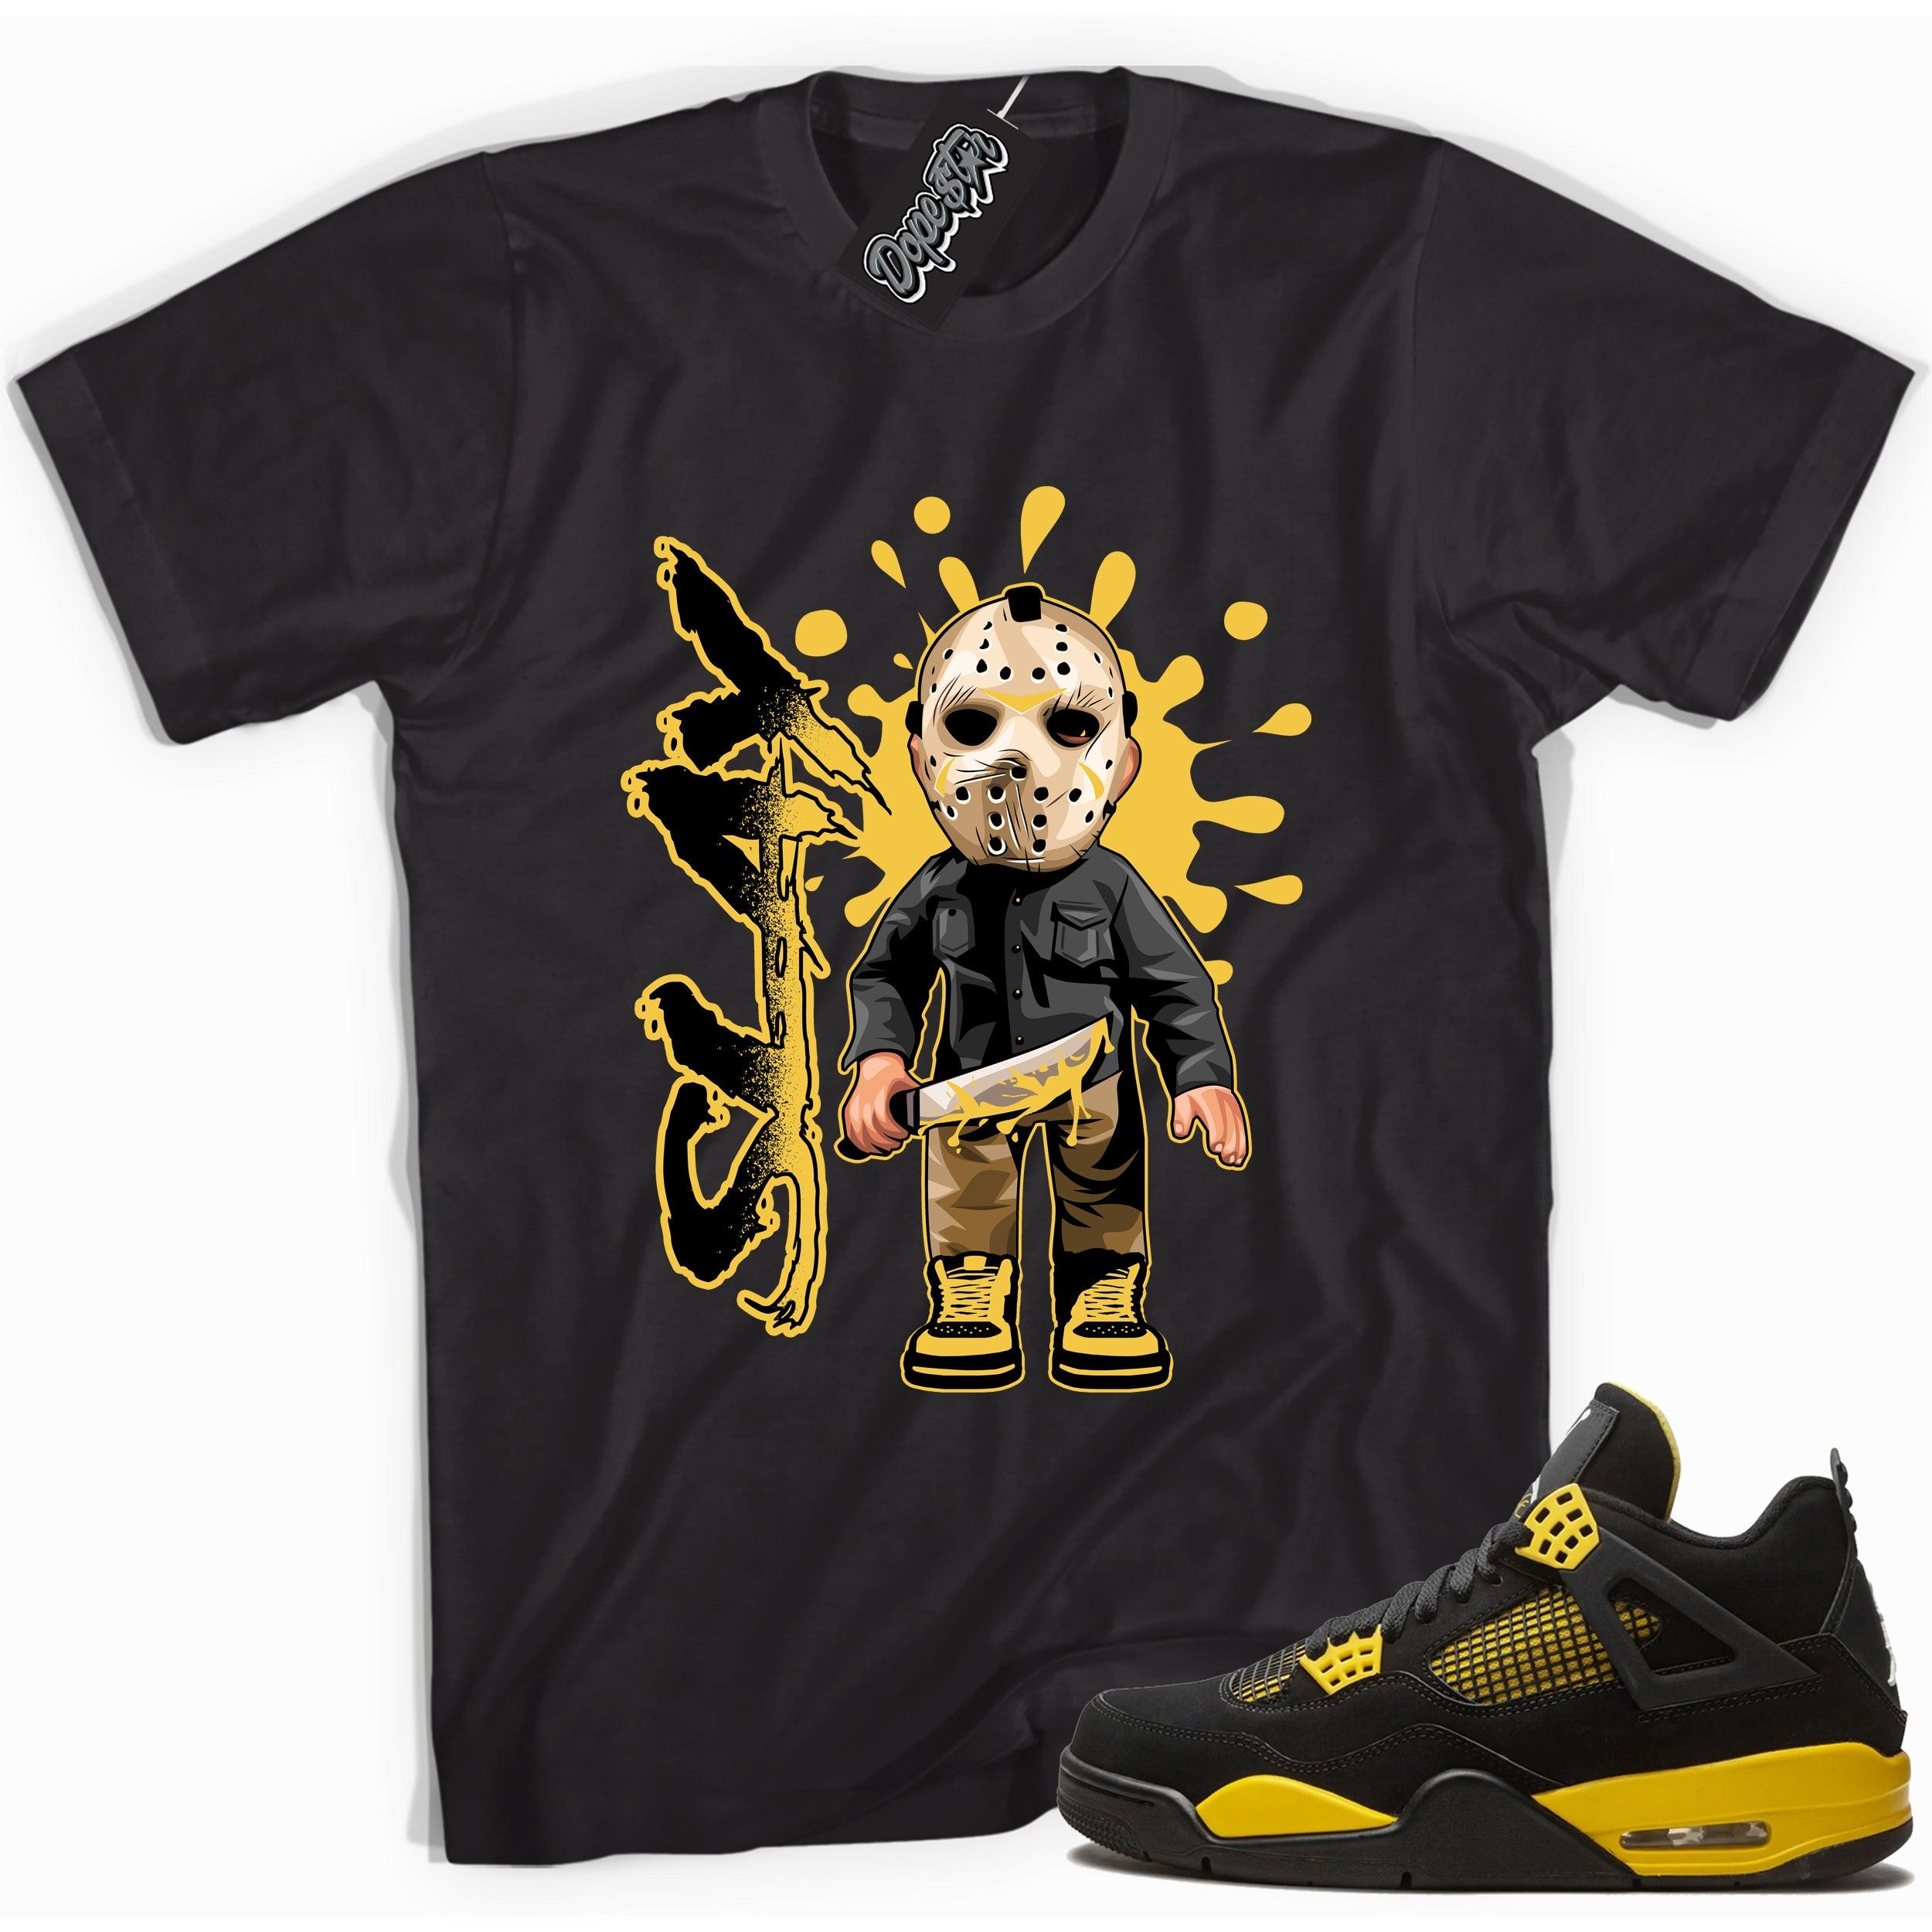 Cool black graphic tee with 'slay' print, that perfectly matches  Air Jordan 4 Thunder sneakers